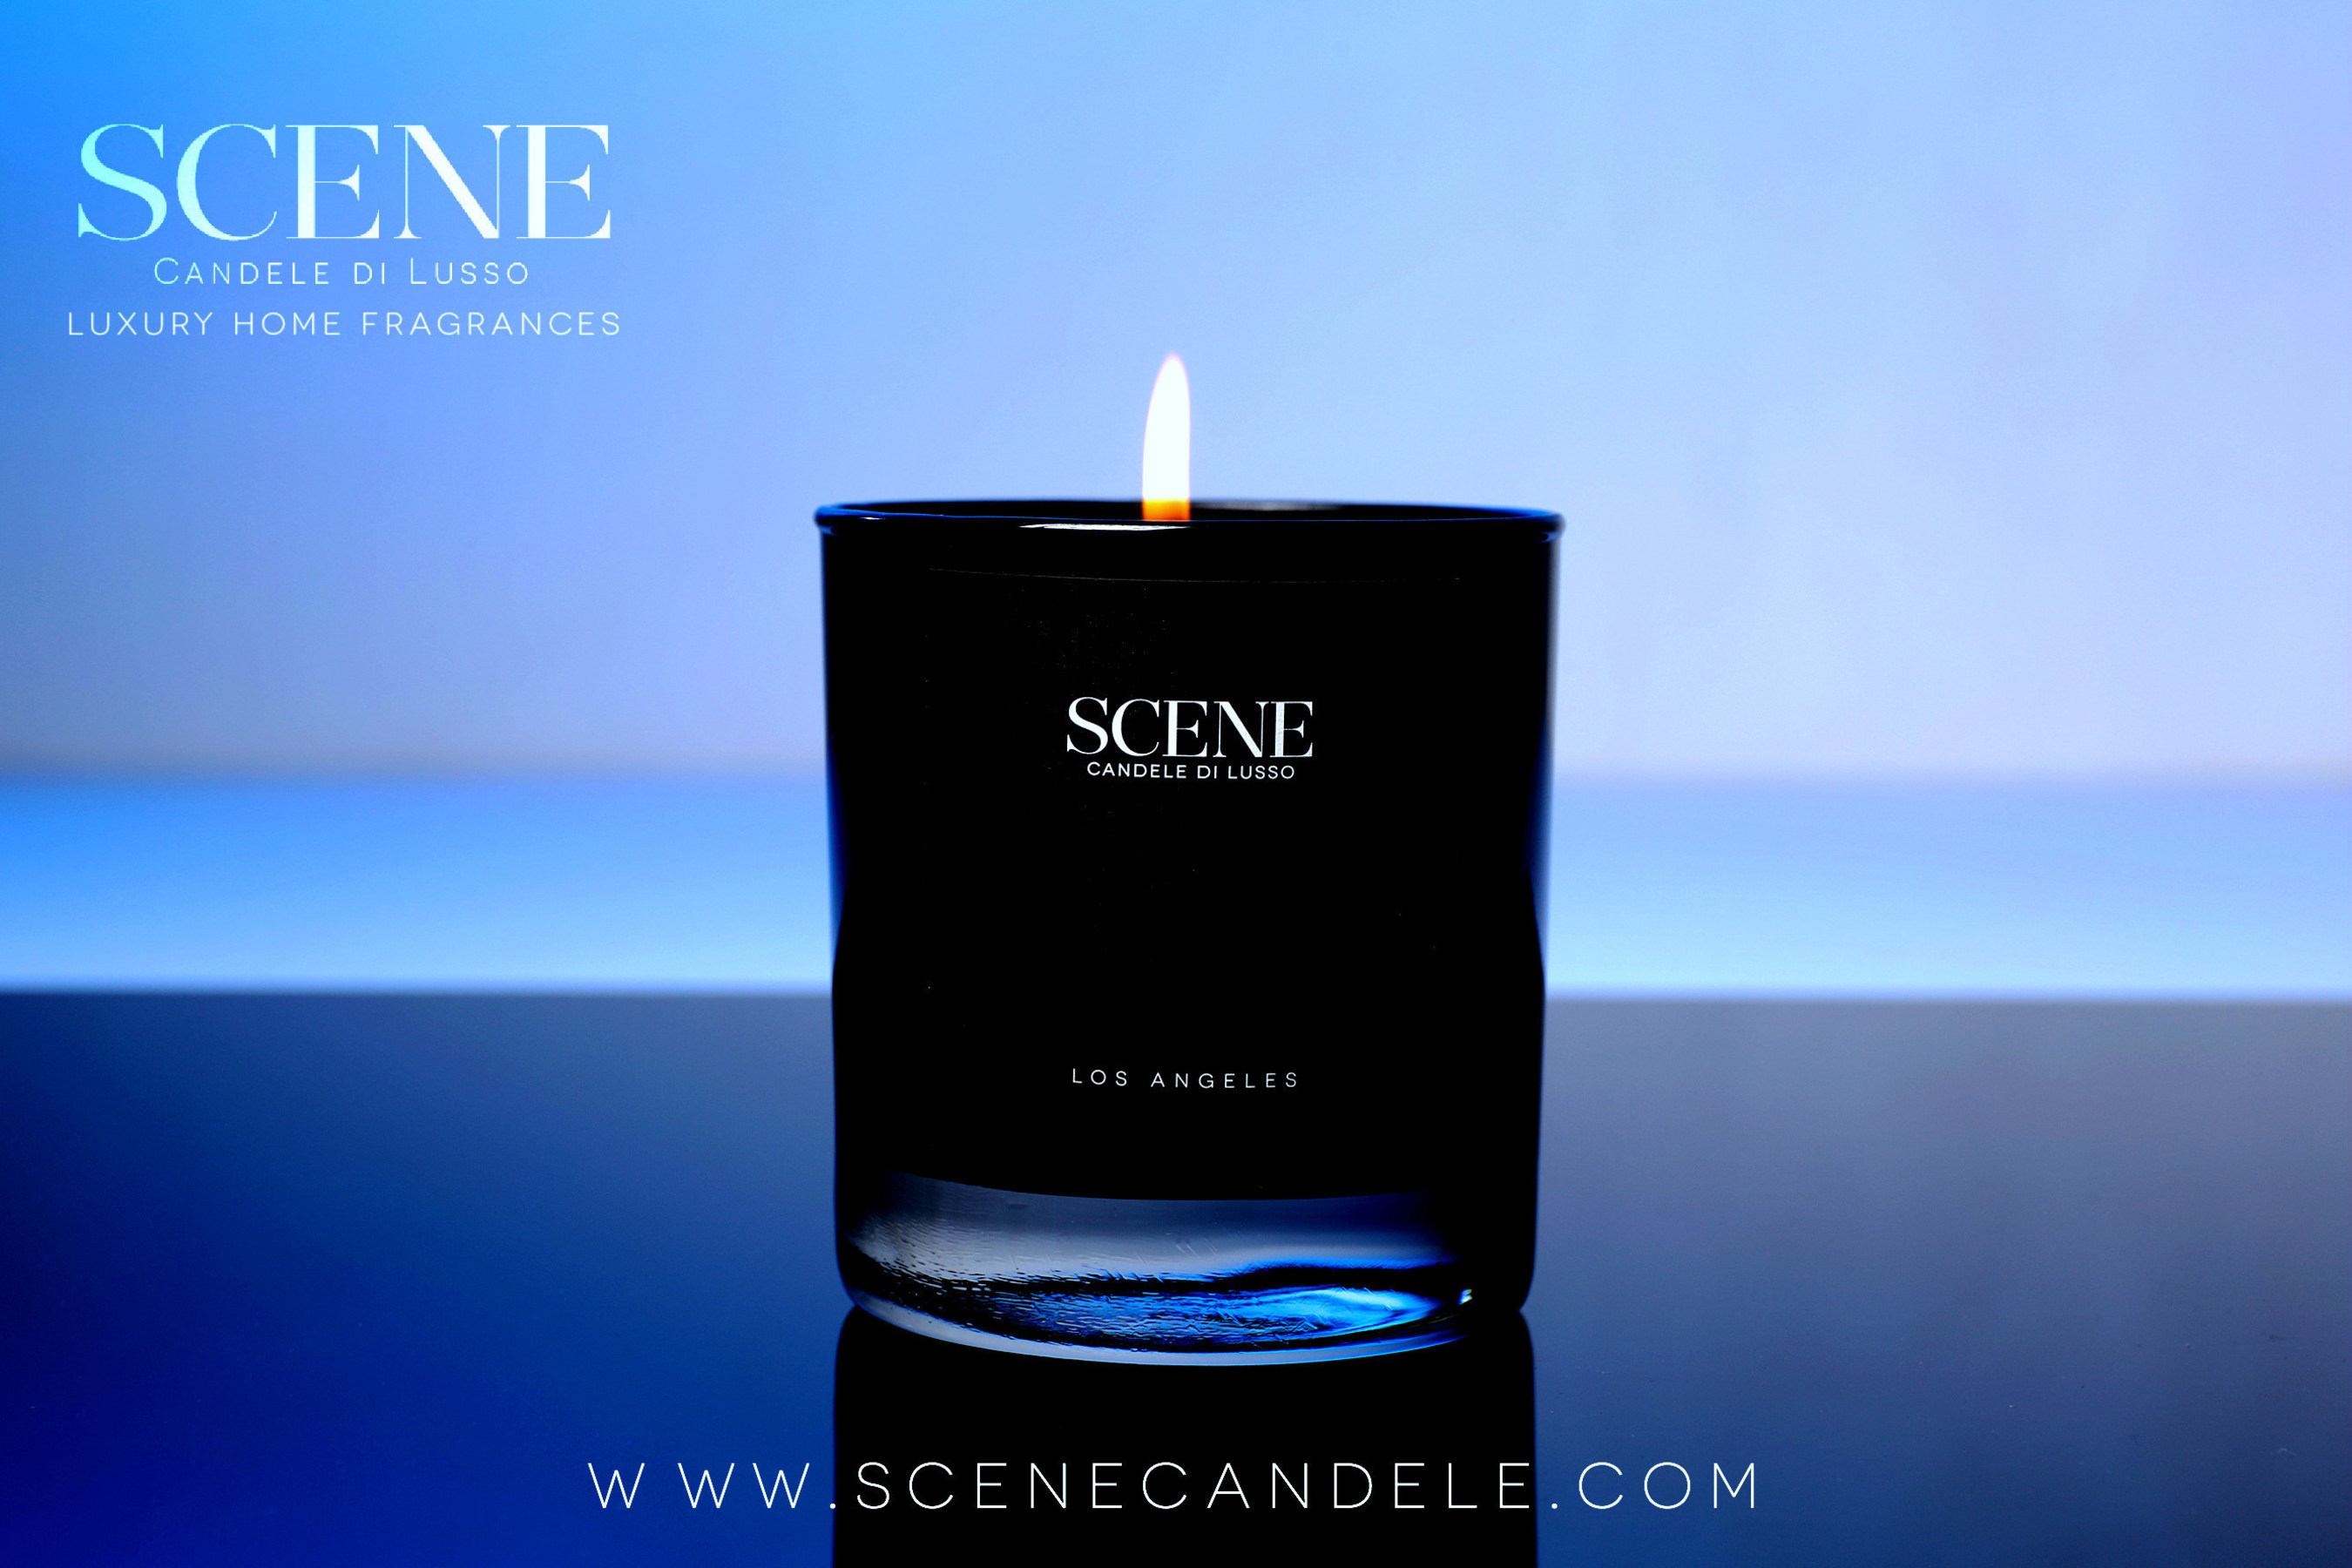 Lexi Chow Announces Launch Of Luxury Candle Line Scene Candele Di Lusso